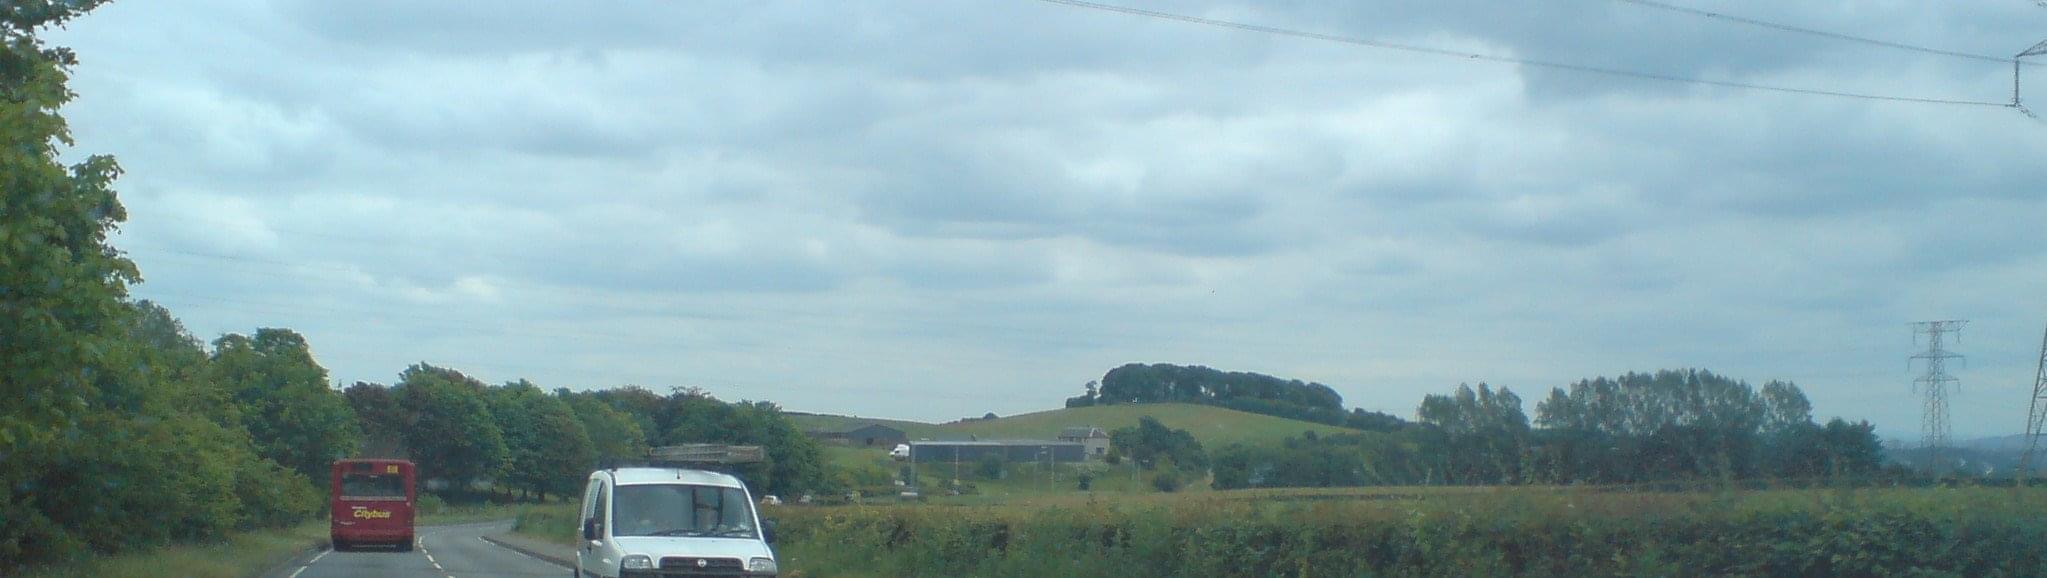 Castlehill Fort from the A810 in 2010